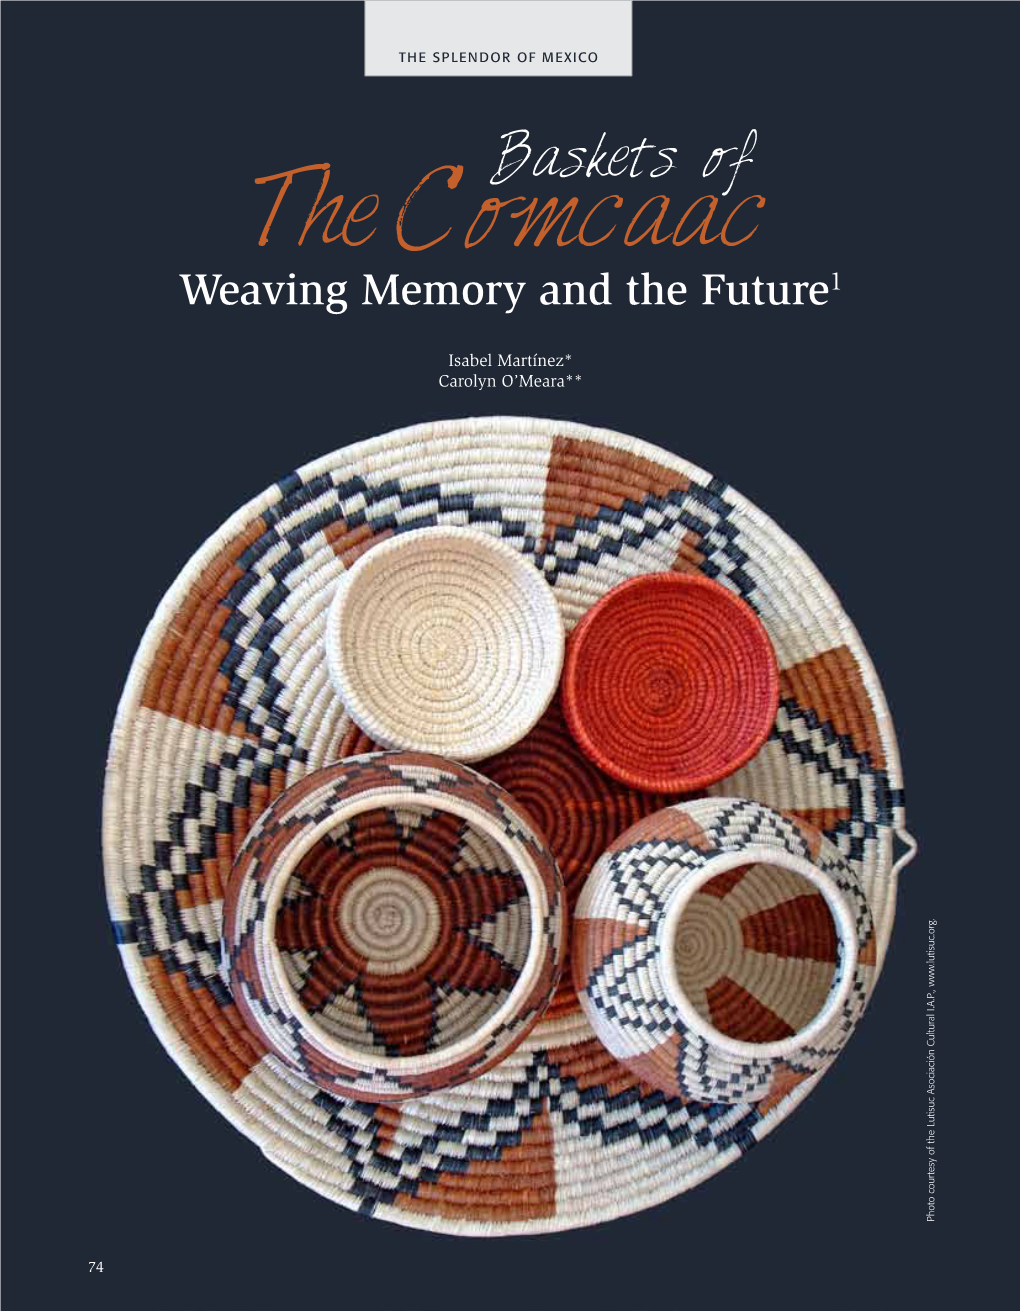 Baskets of the Comcaac Weaving Memory and the Future1